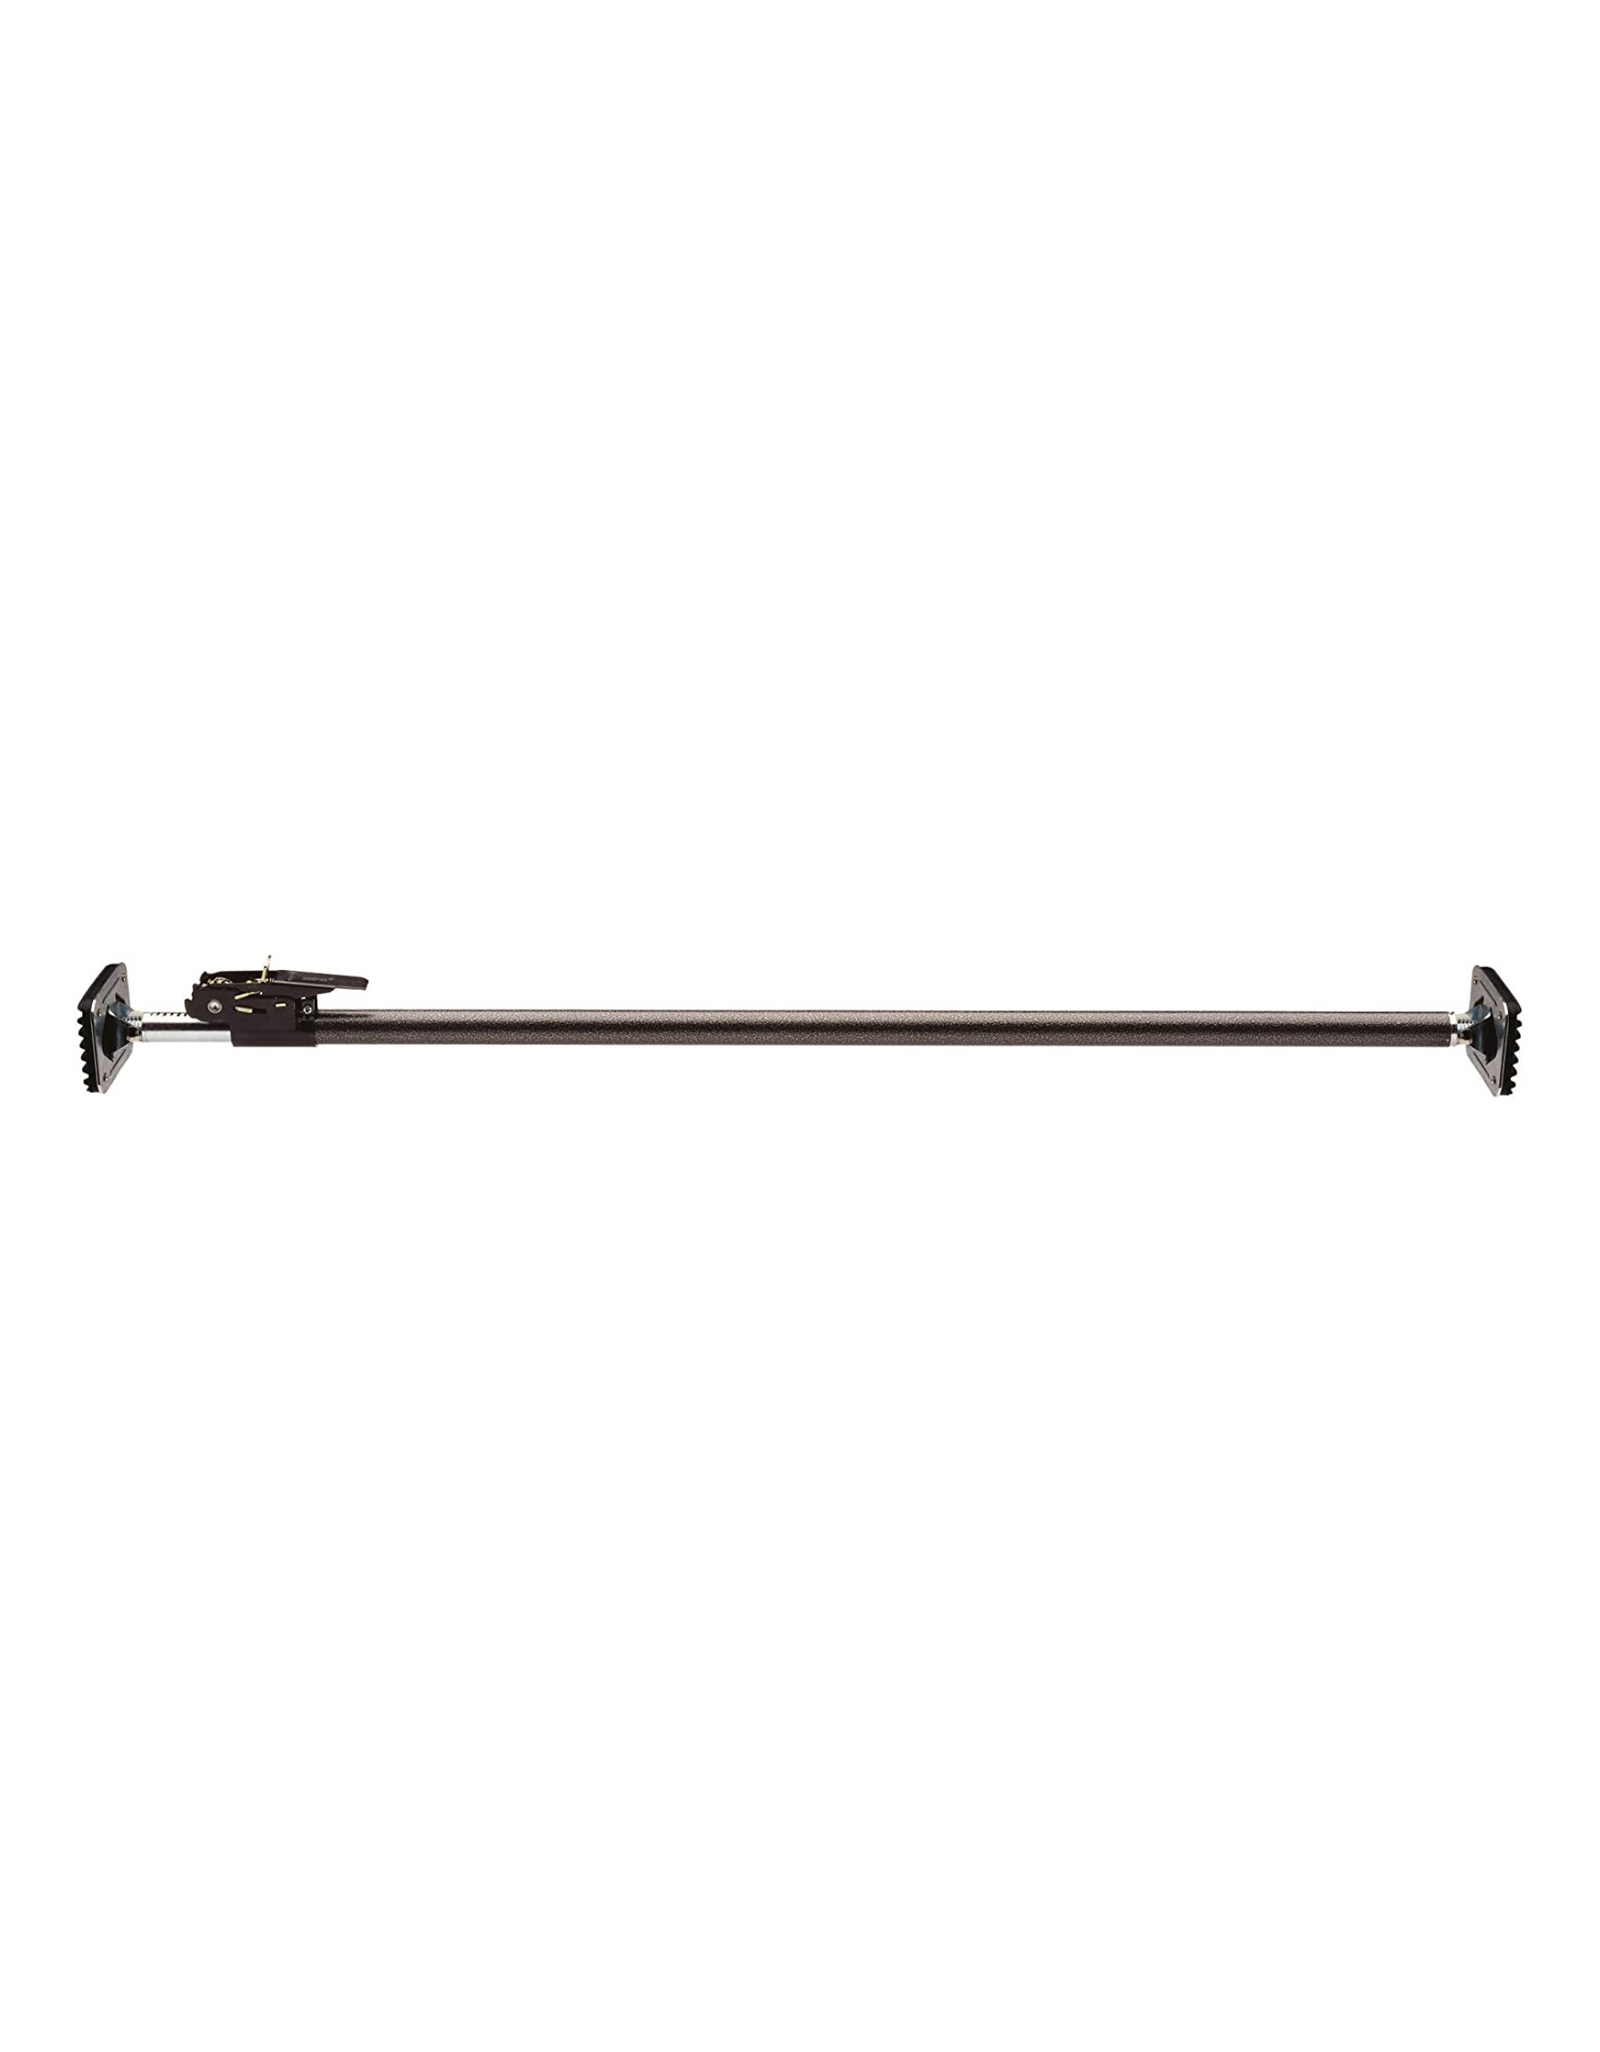 Reese Explore 1390600 40" x 70" Ratcheting Cargo Bar, Adjusts from 40"to 70", black